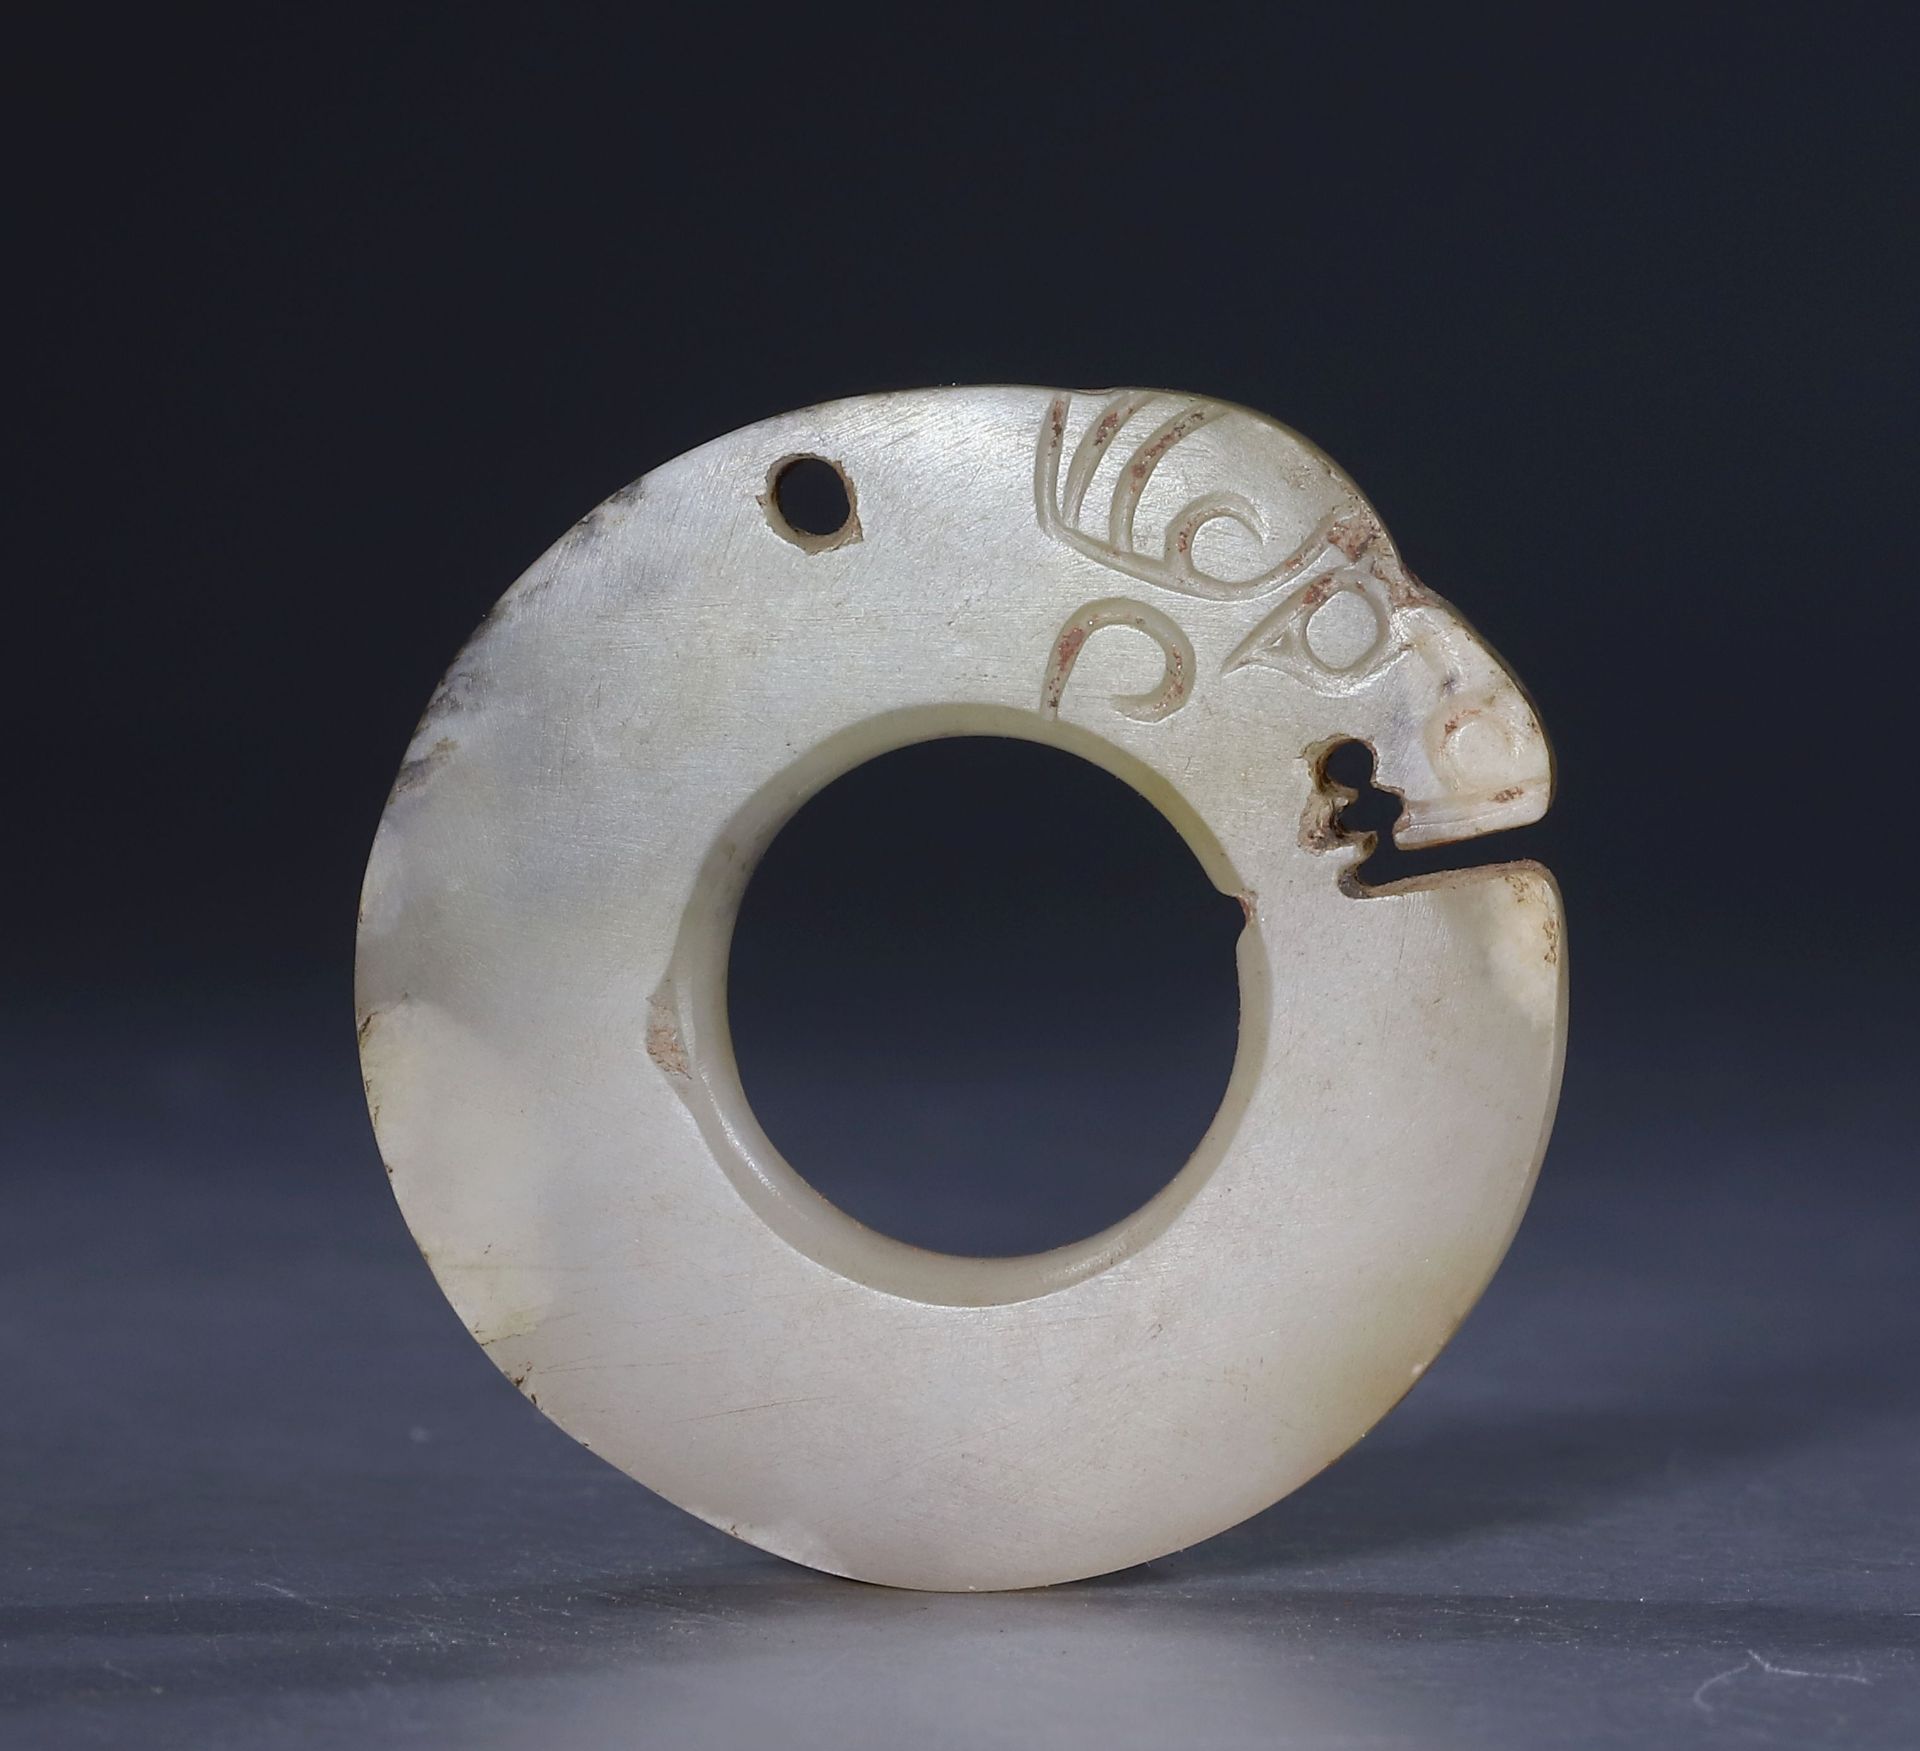 Dragon shaped ring from The western zhou Period